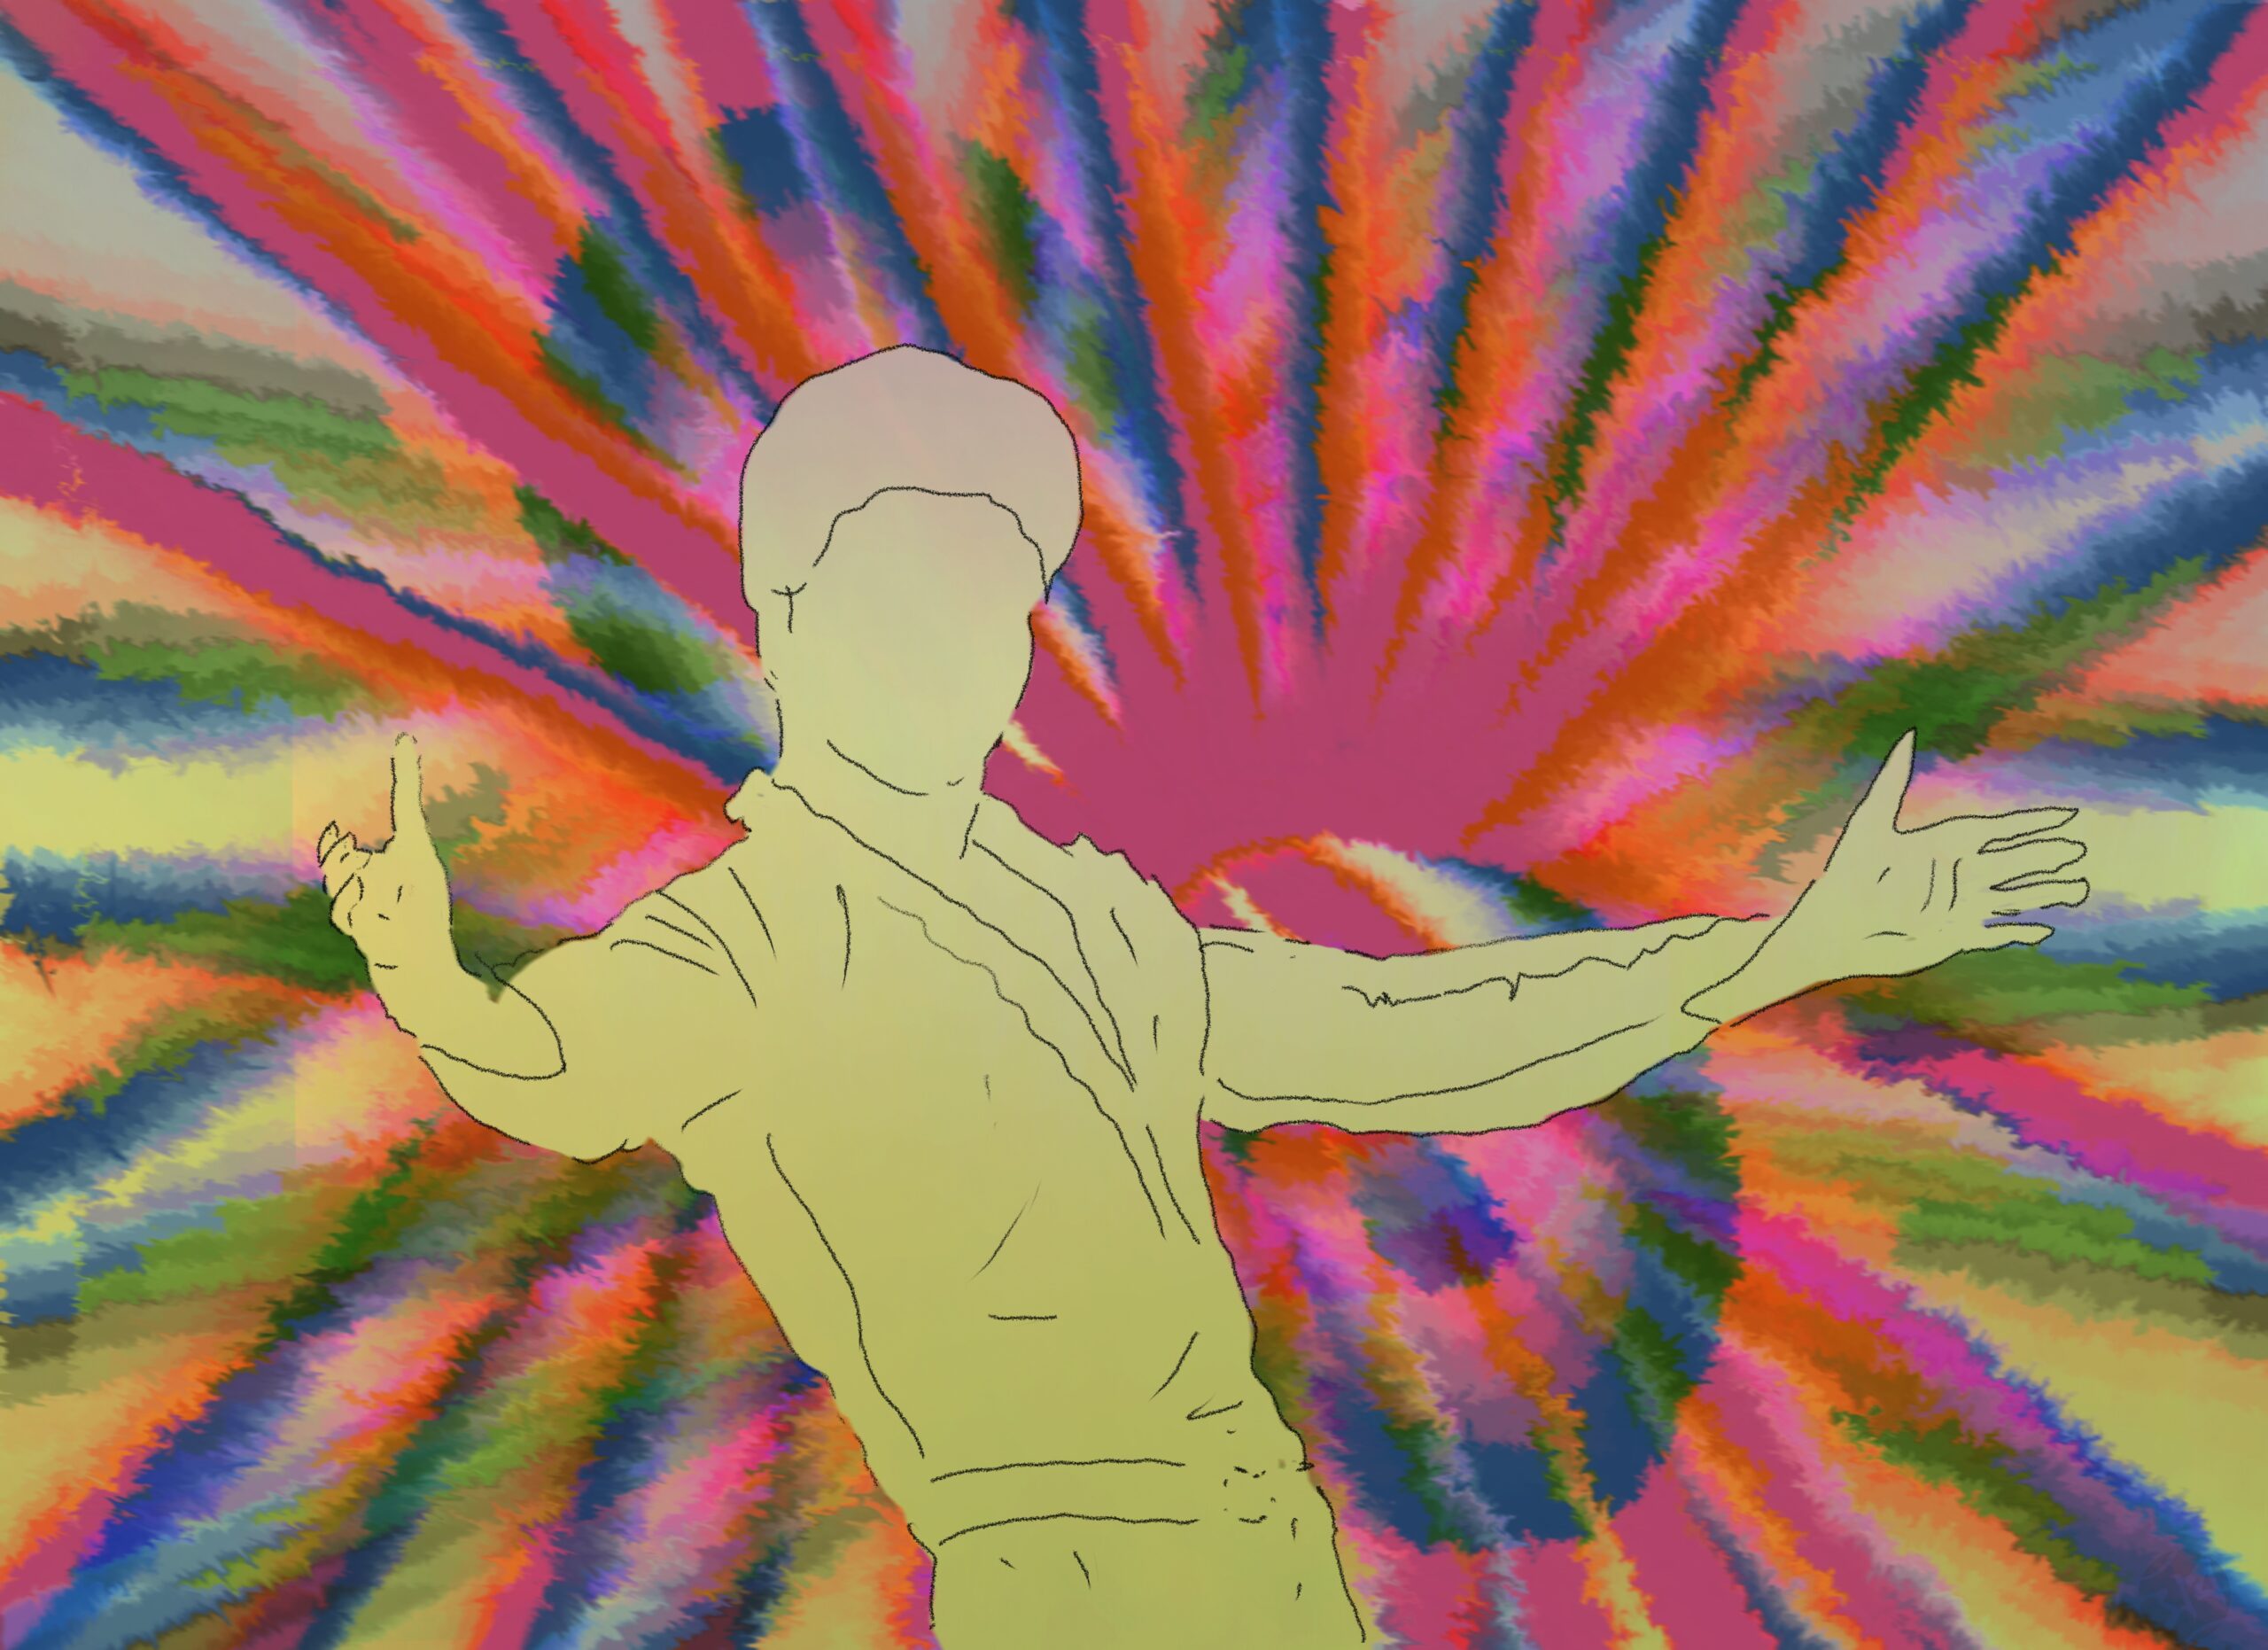 outline of male figure, leaning slightly to the front right with arms outstretched, against a background of spoked wheels of psychadelic pink, yellow, and green colors